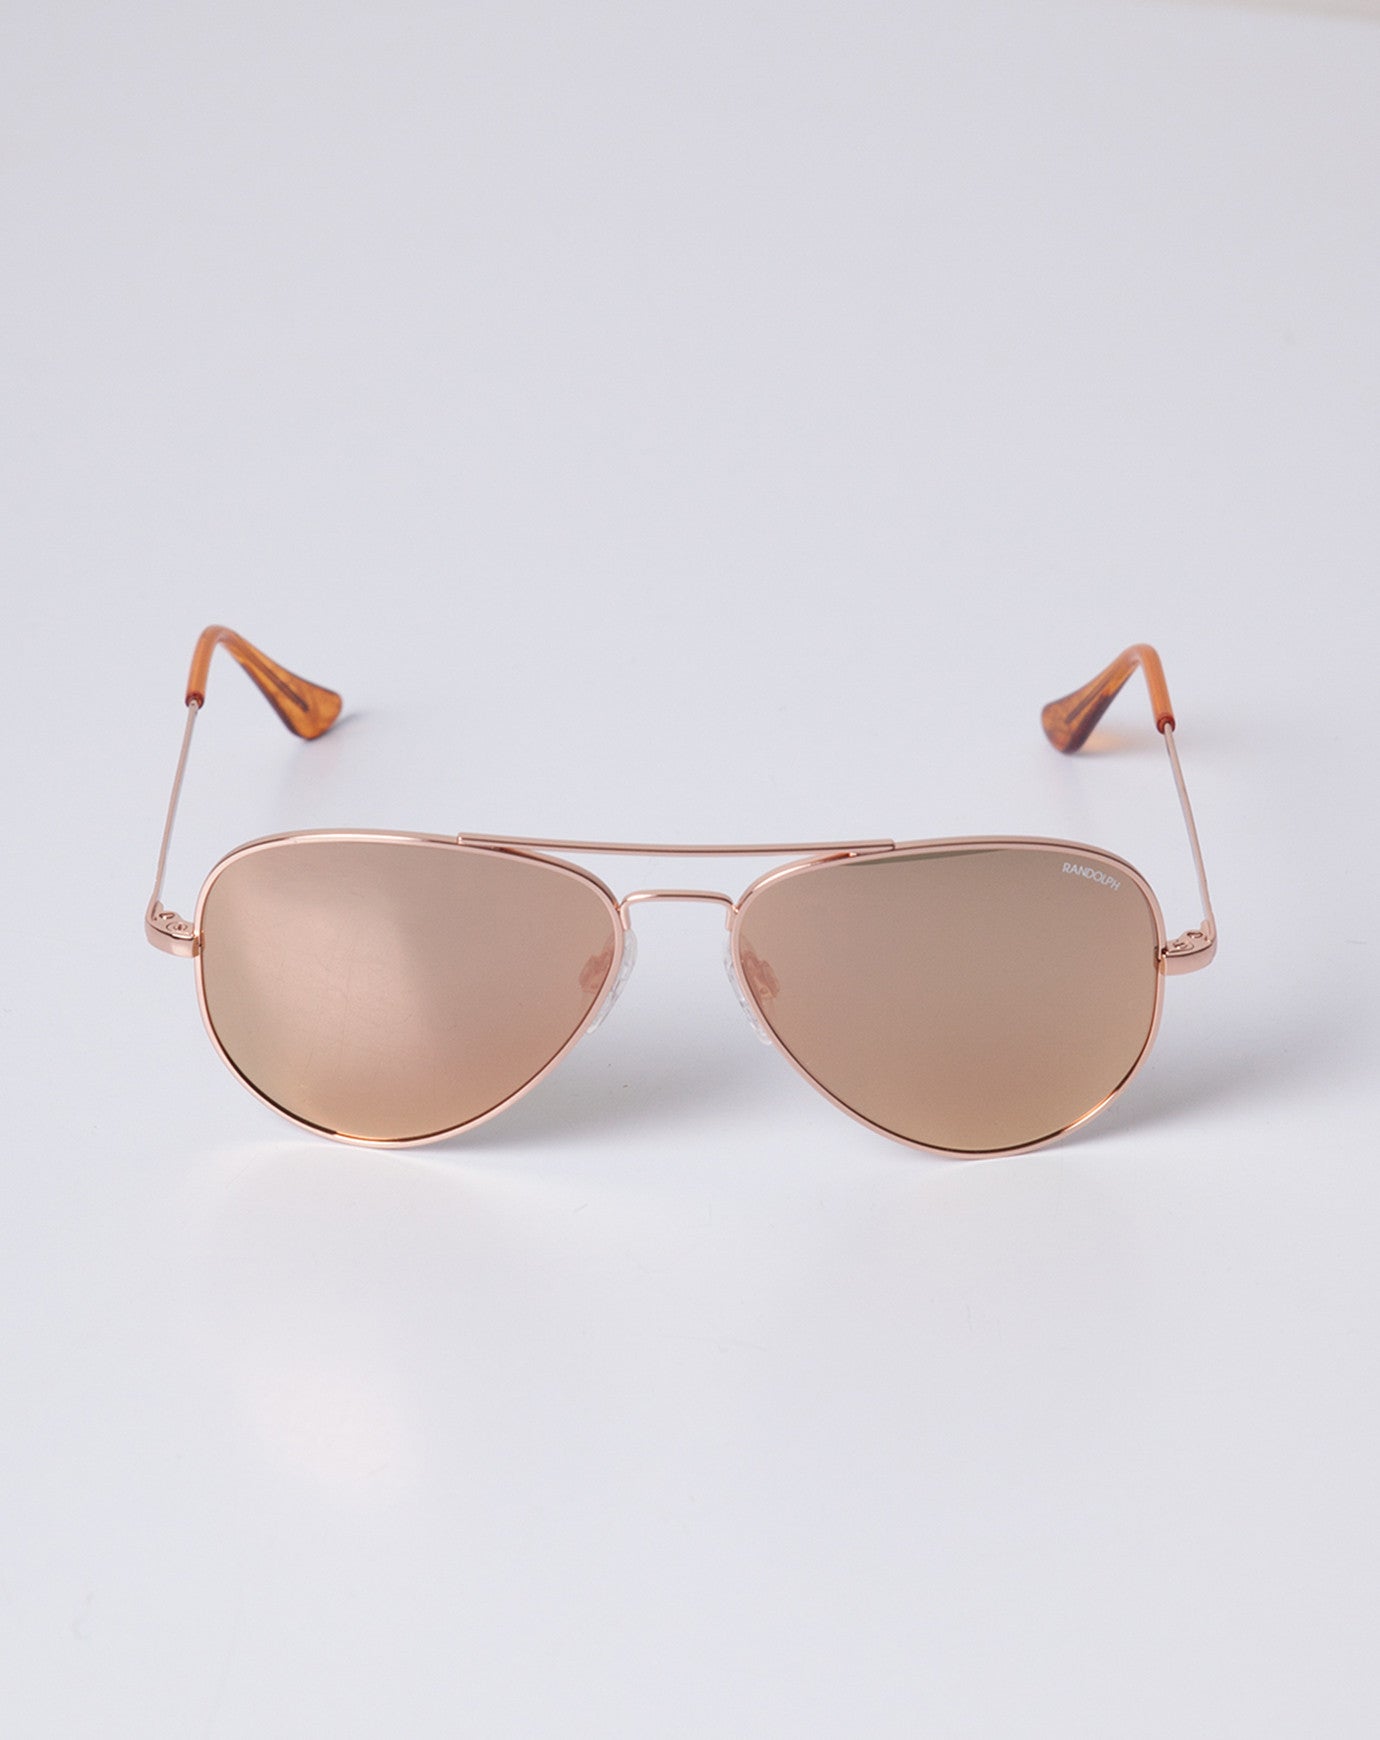 Concorde in Rose Gold | Randolph Engineering | Covet + Lou